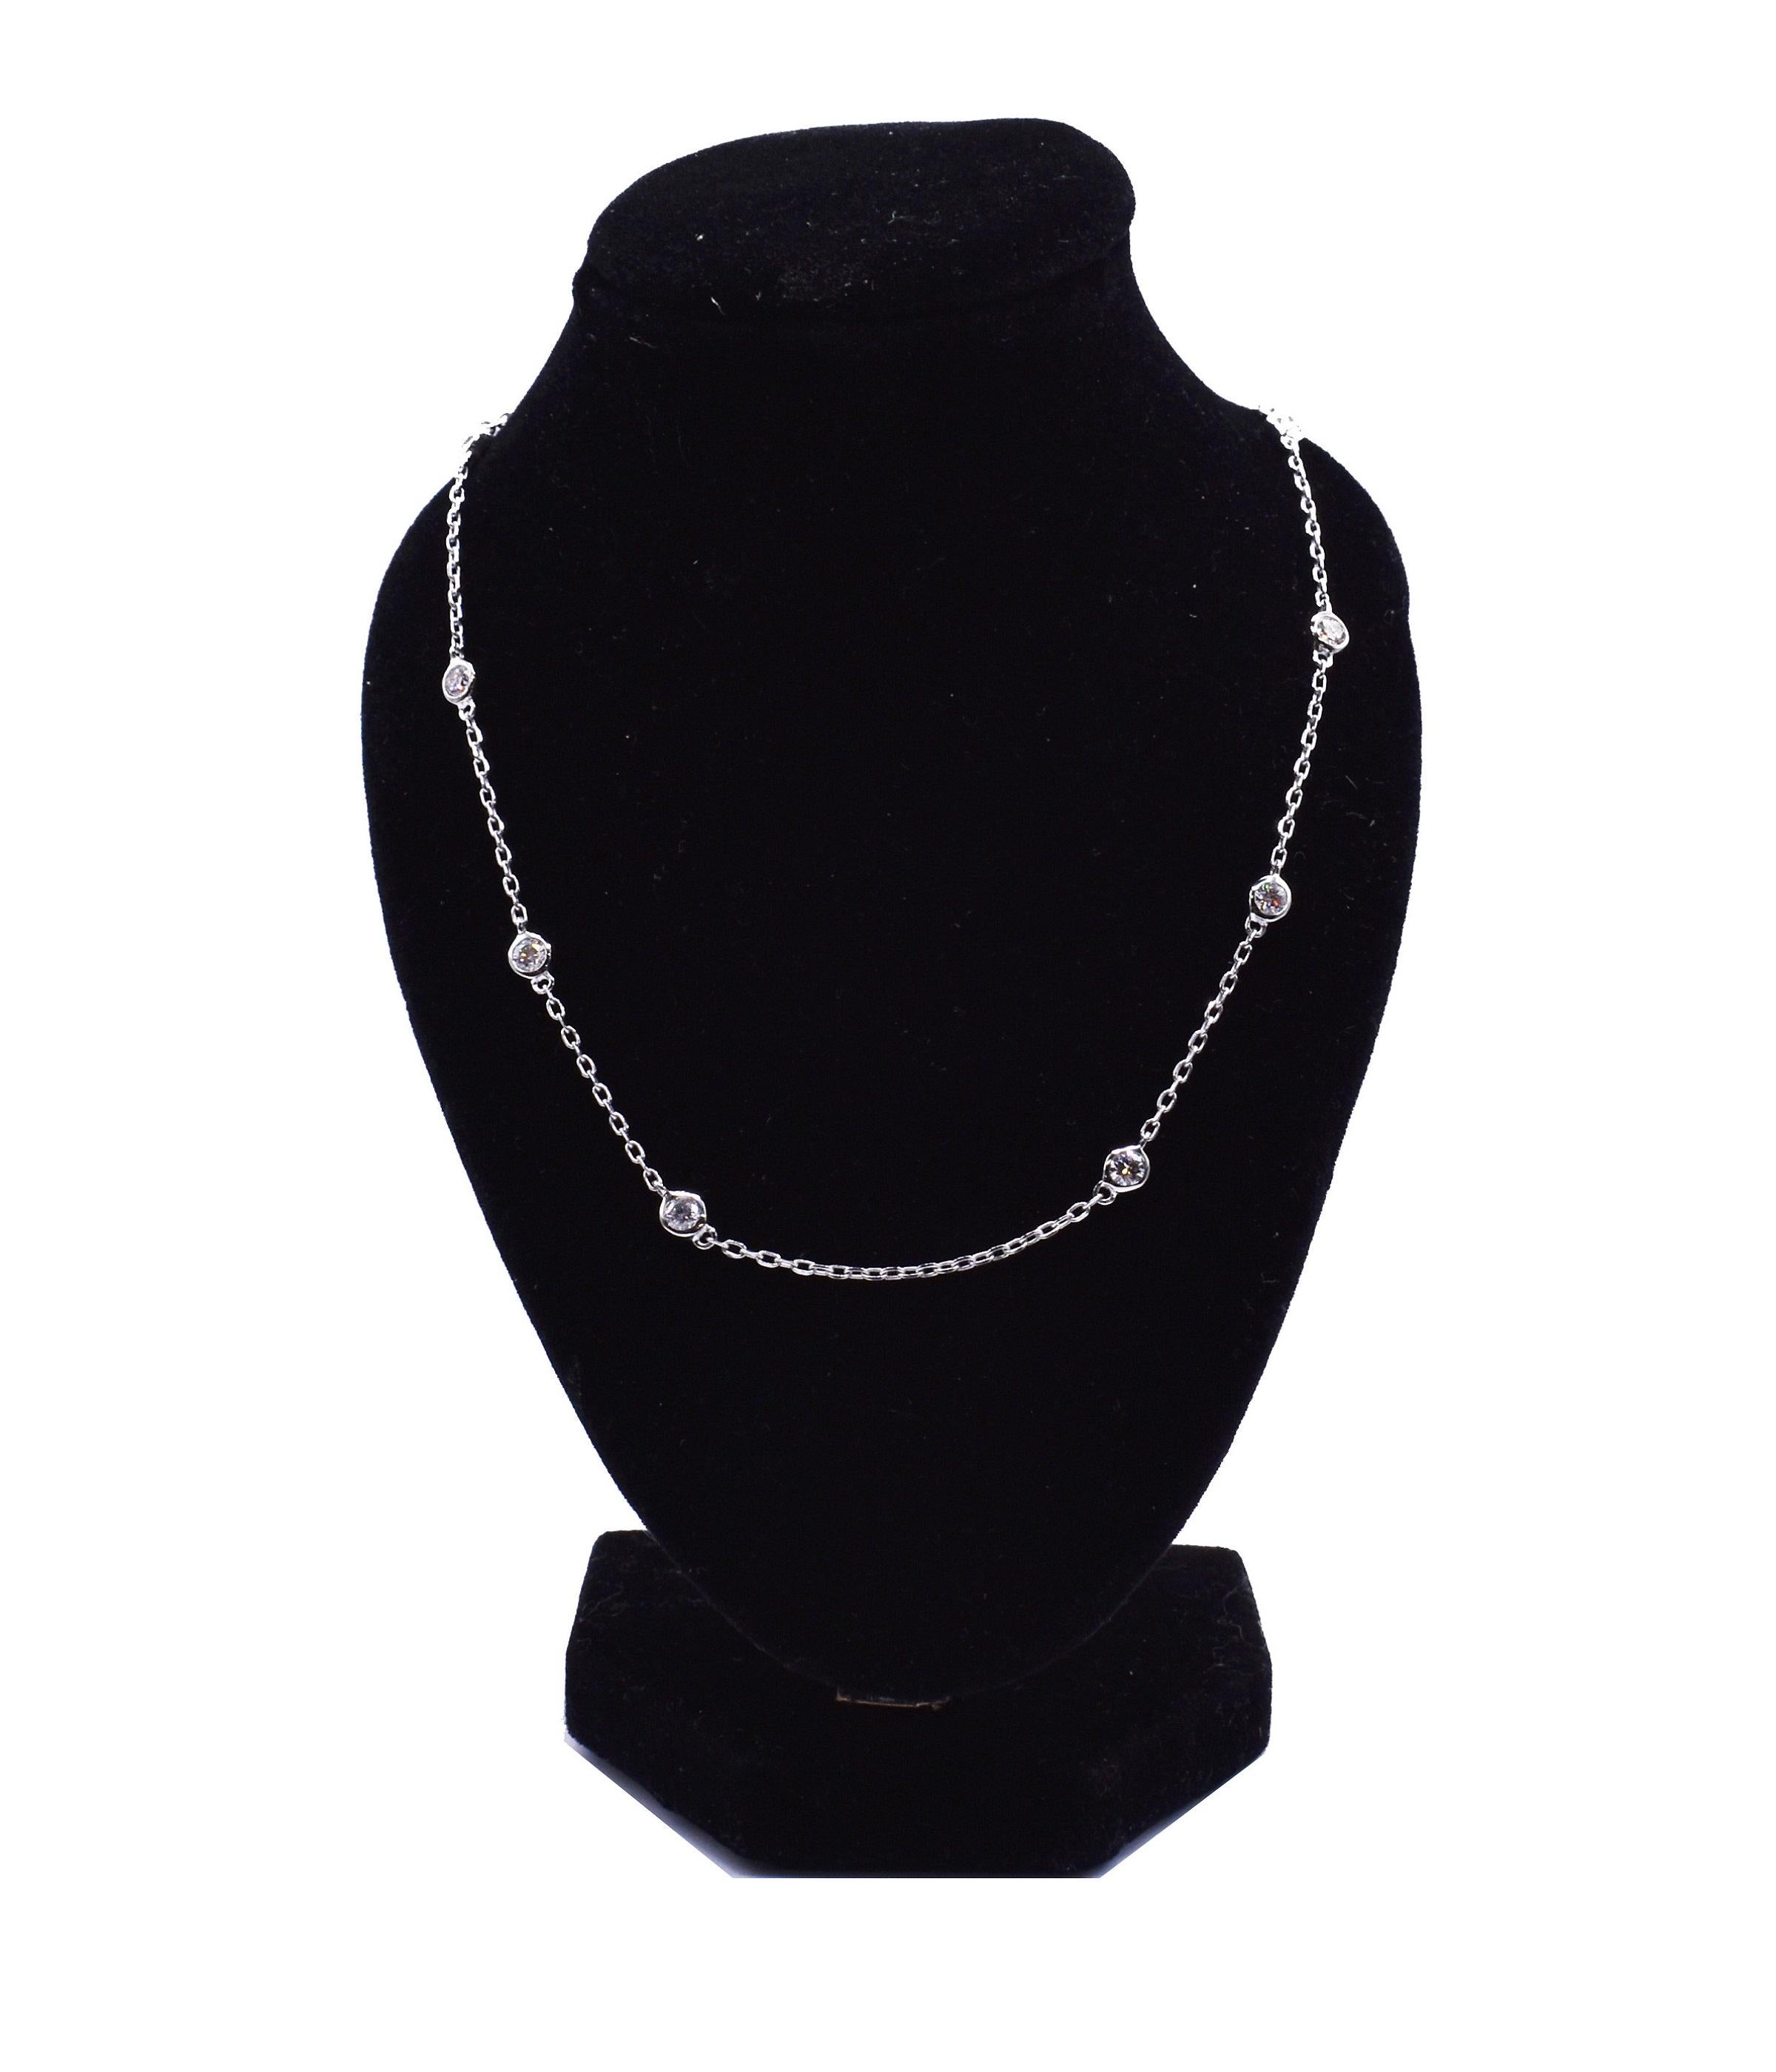 A wonderful 18k white gold chain decorated with 10 round cut diamonds. Diamonds = 1.06ct Gold weight = 4.44g

Length: 22cm